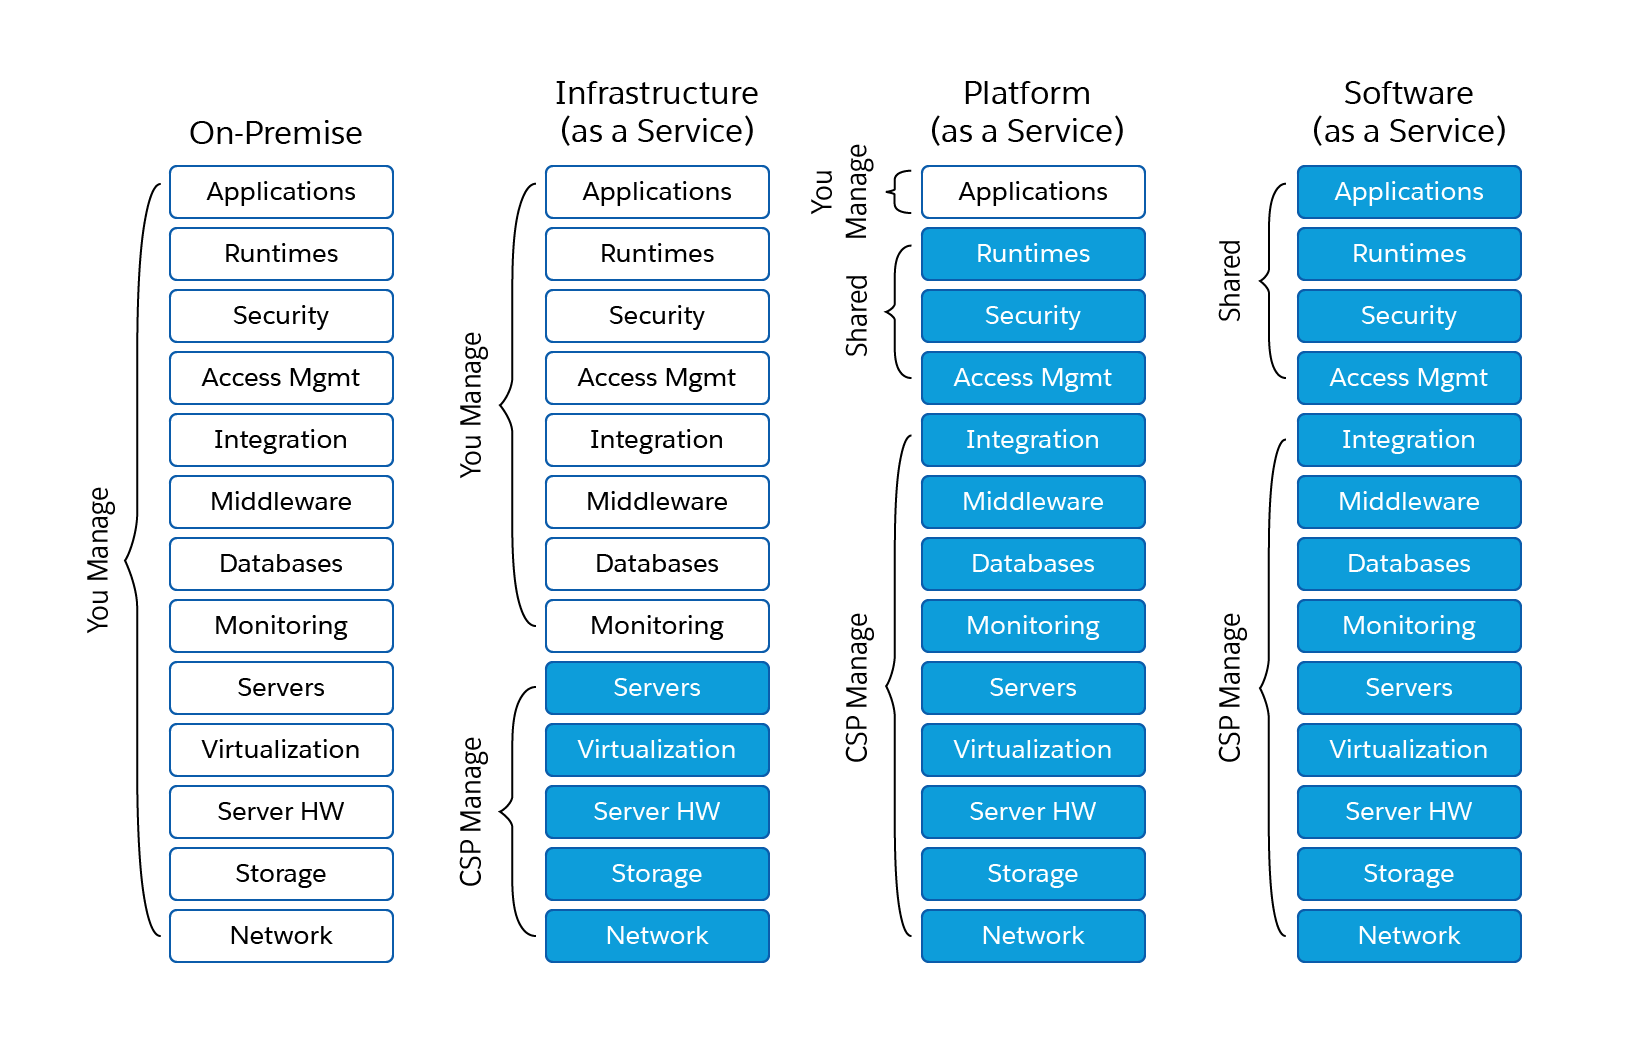 cloud service provider model showing responsibilities for On-premise, Infrastructure as a service, platform as a service, and software as a service.